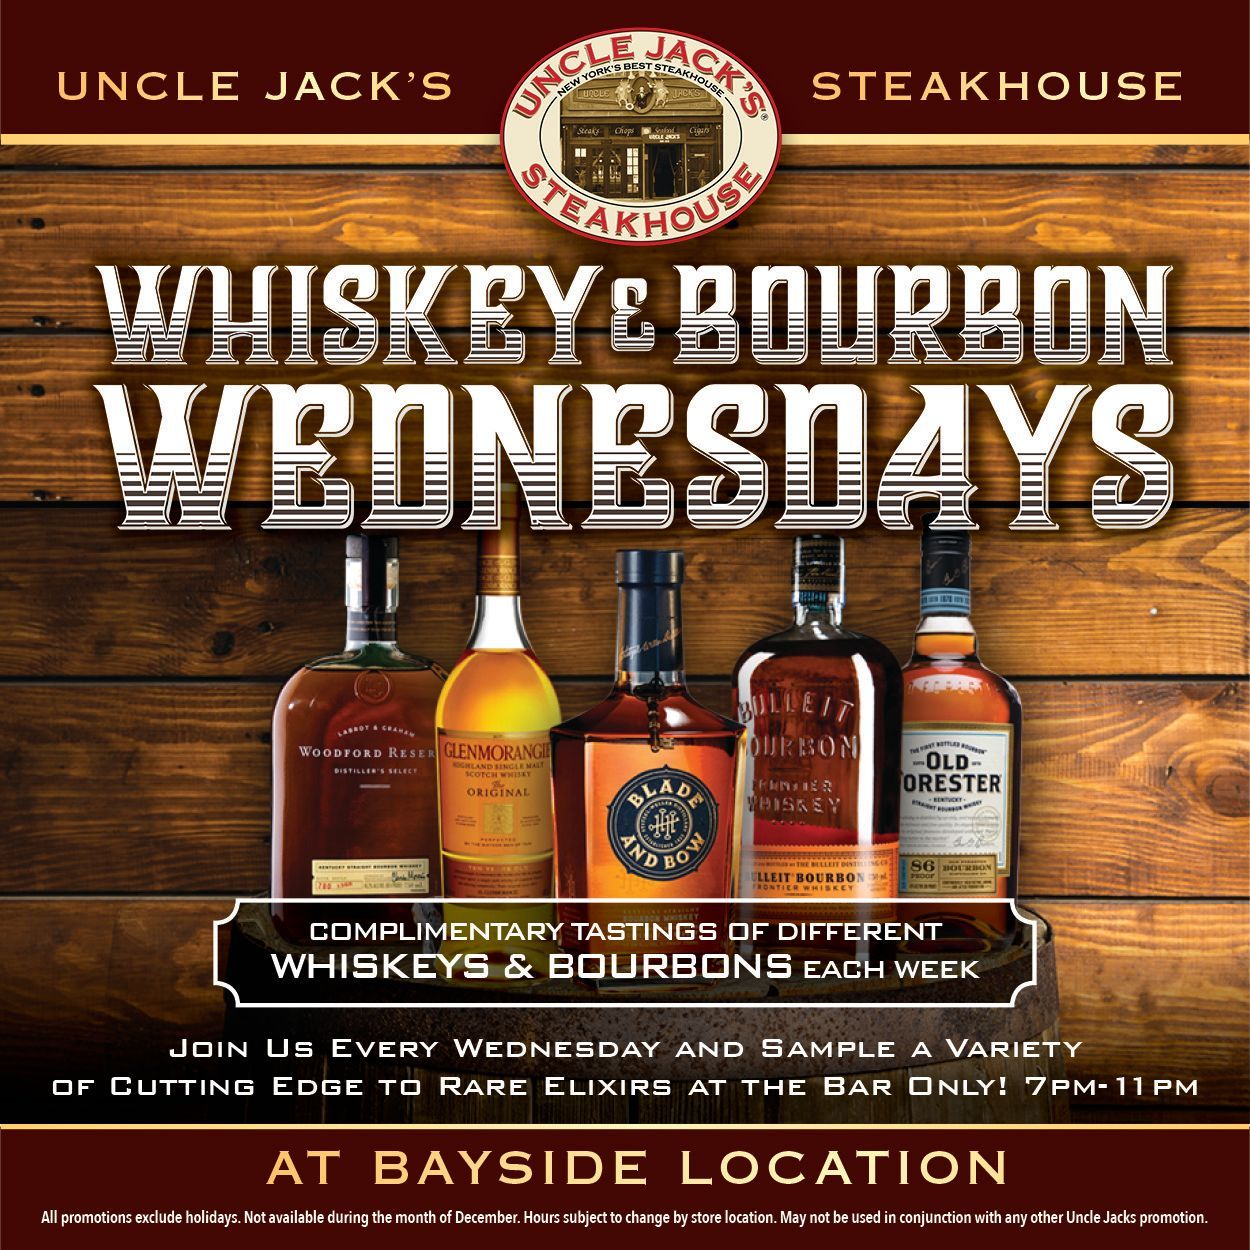 an advertisement for whiskey and bourbon wednesdays at uncle jack 's steakhouse